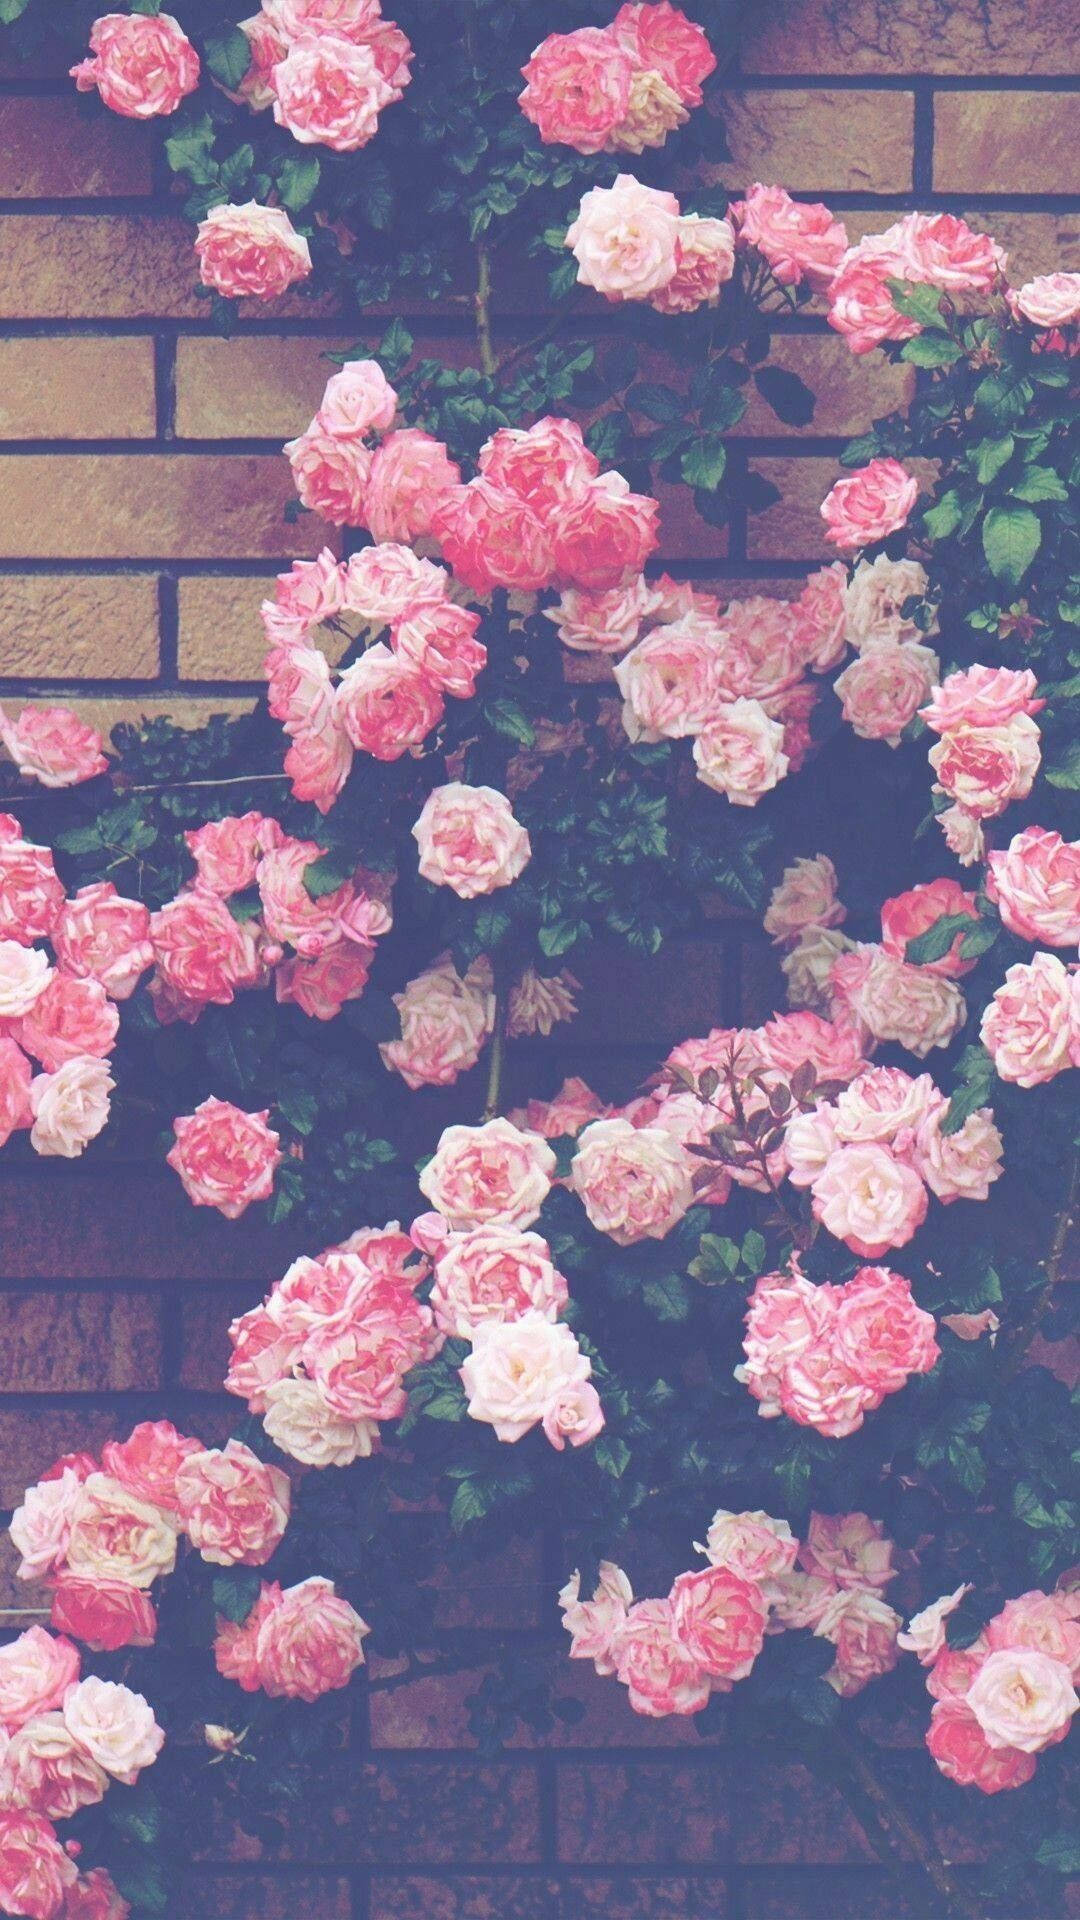 Enchanting Aesthetic of Pink Flowers Against a Wall Wallpaper